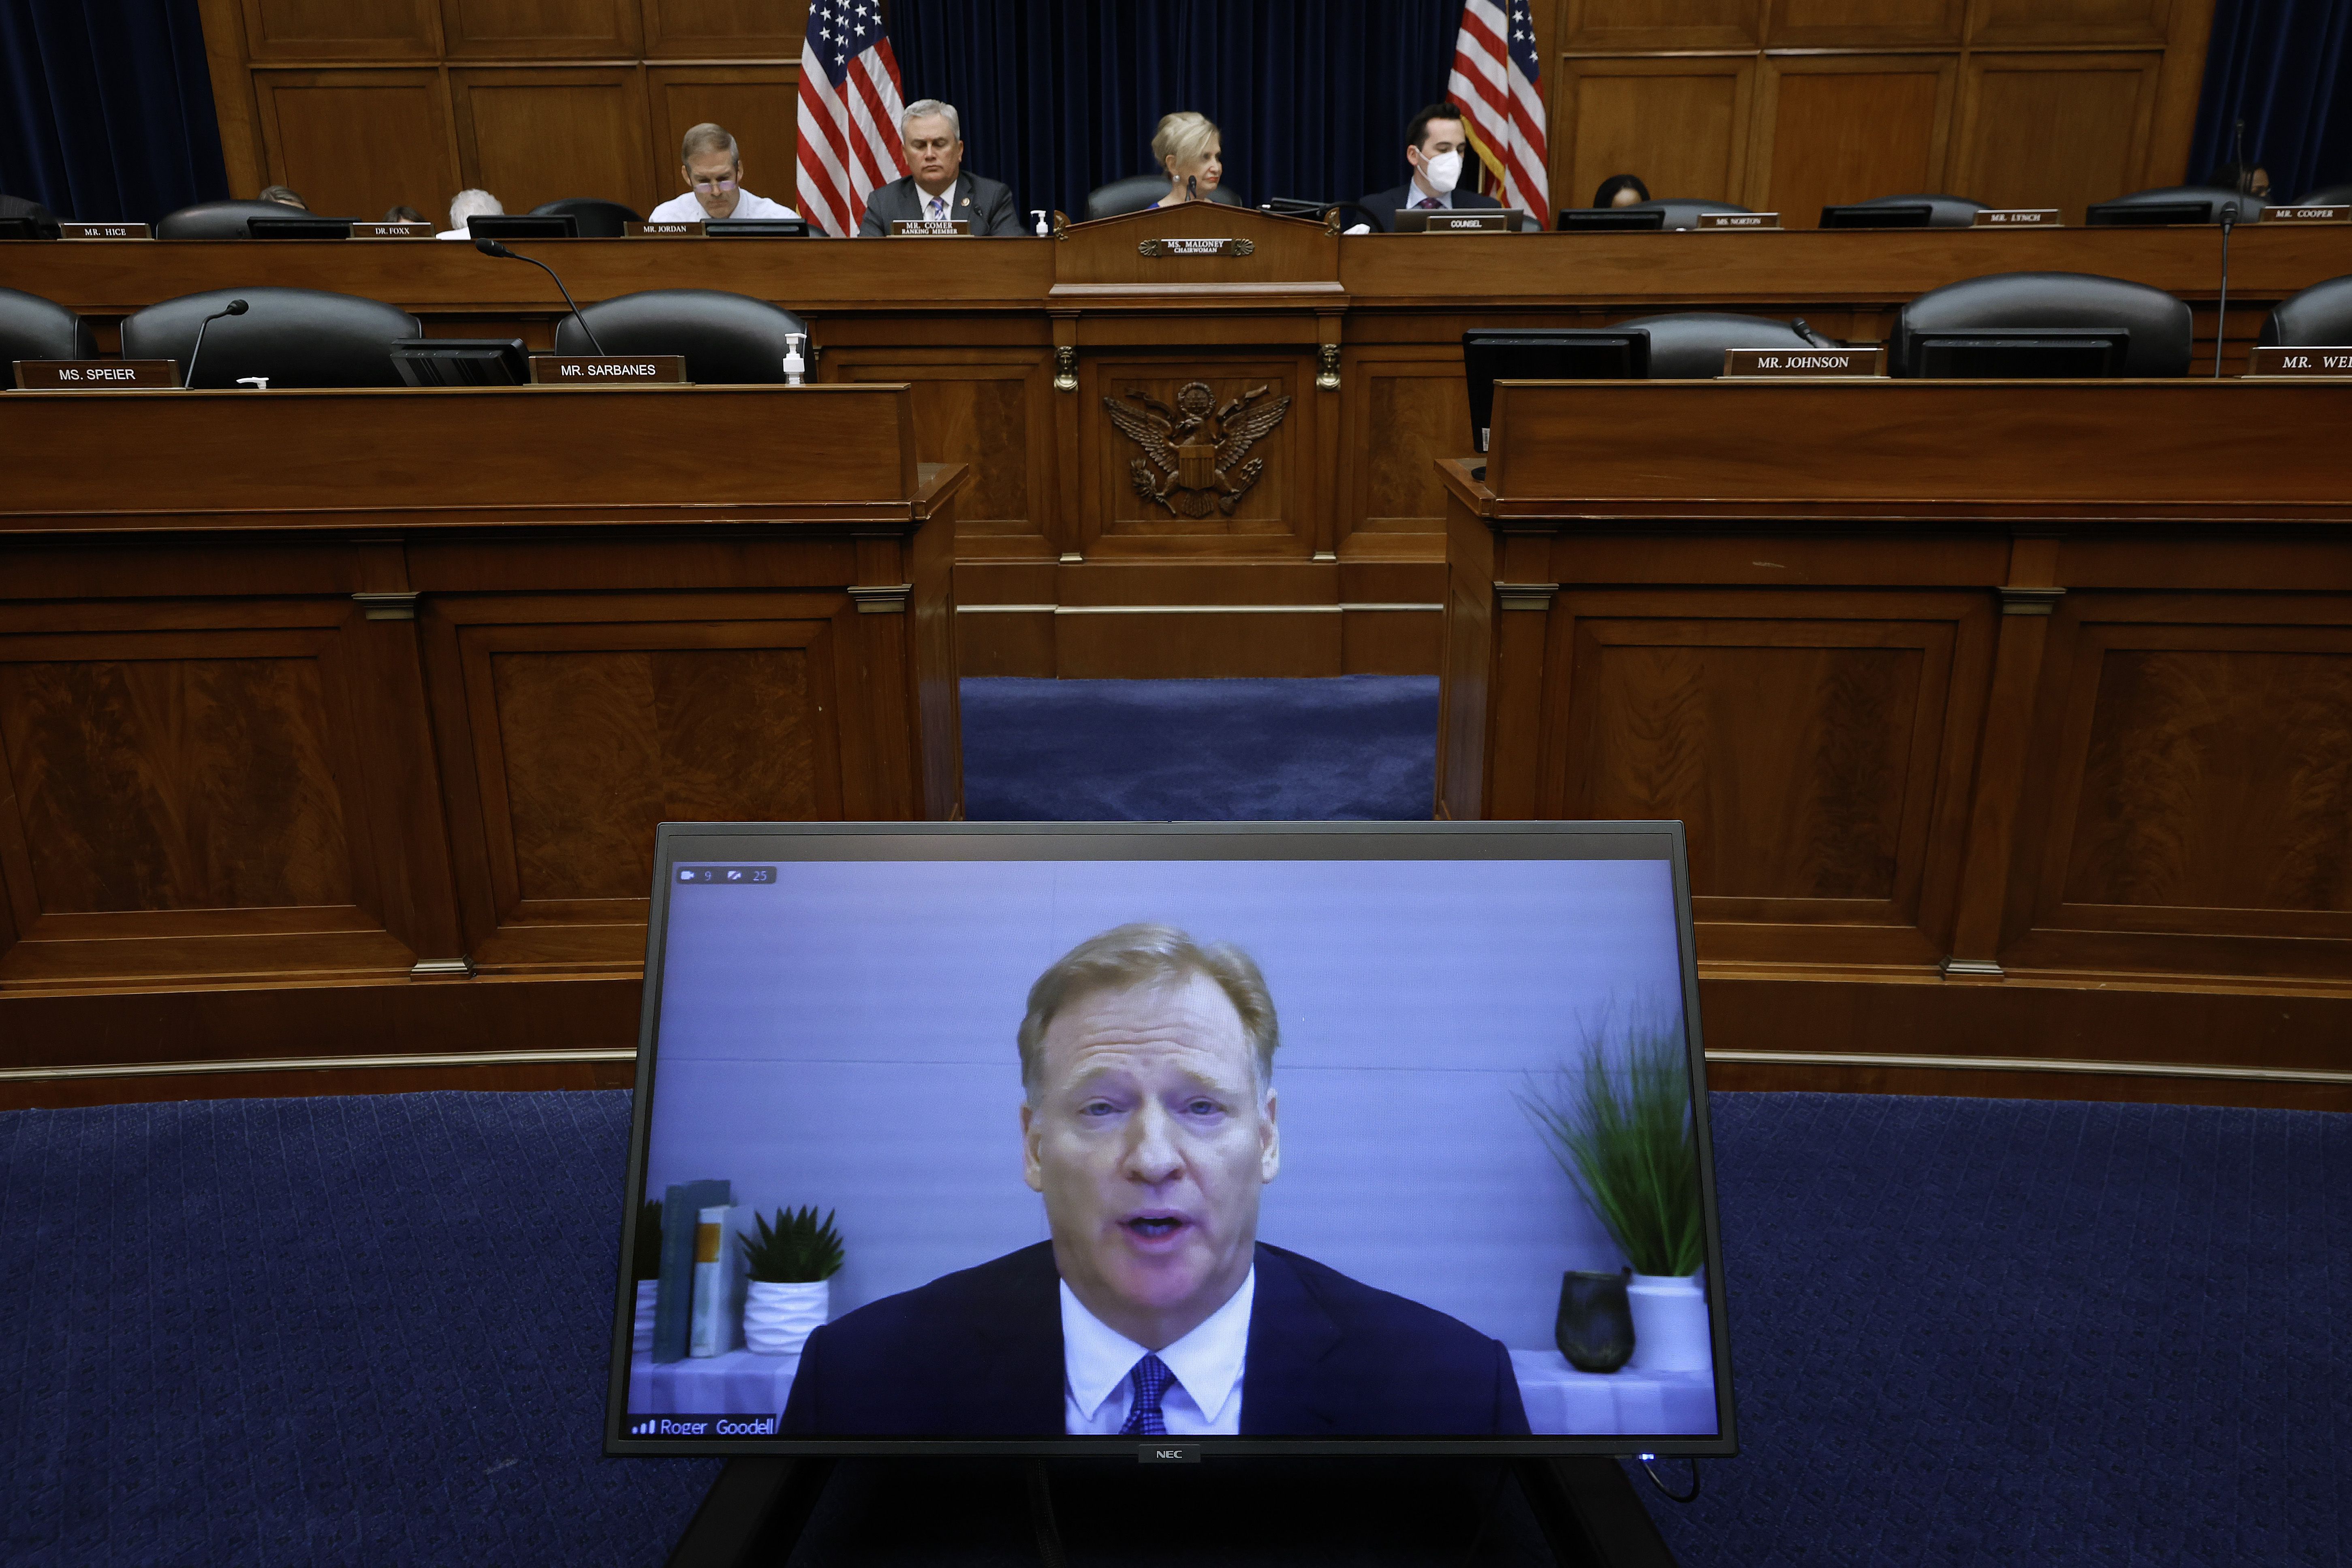 Roger Goodell virtually testifies to the House Oversight and Government Reform Committee on Capitol Hill.